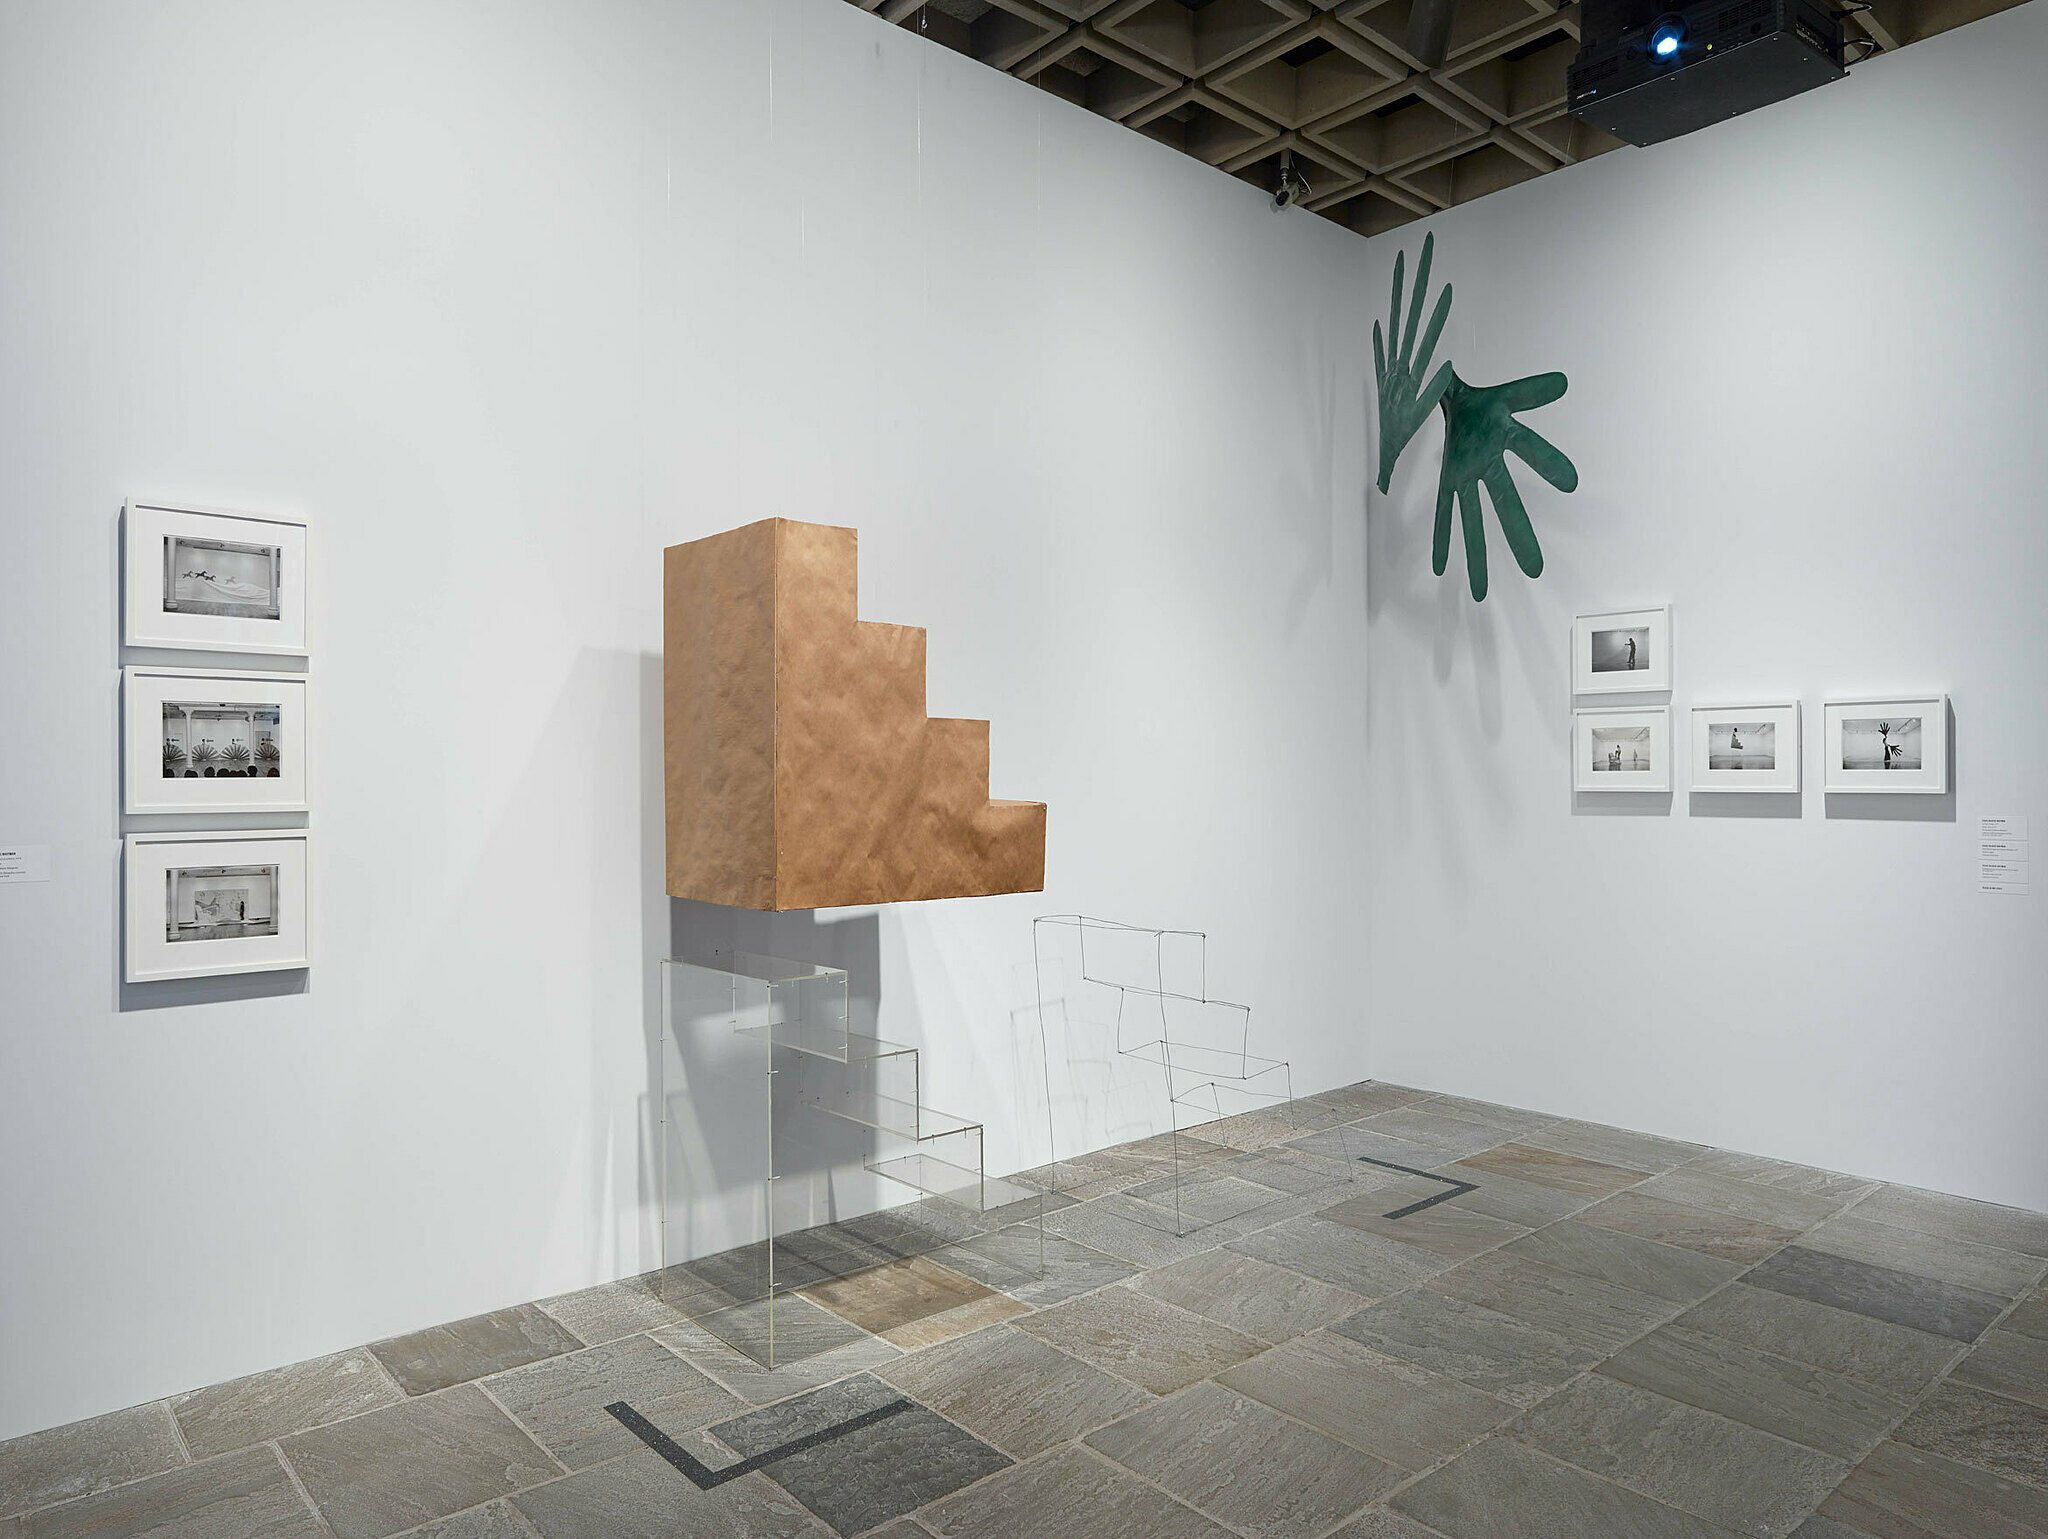 Art installation with photography on the walls, green hands in the corner and a wooden block of stairs.